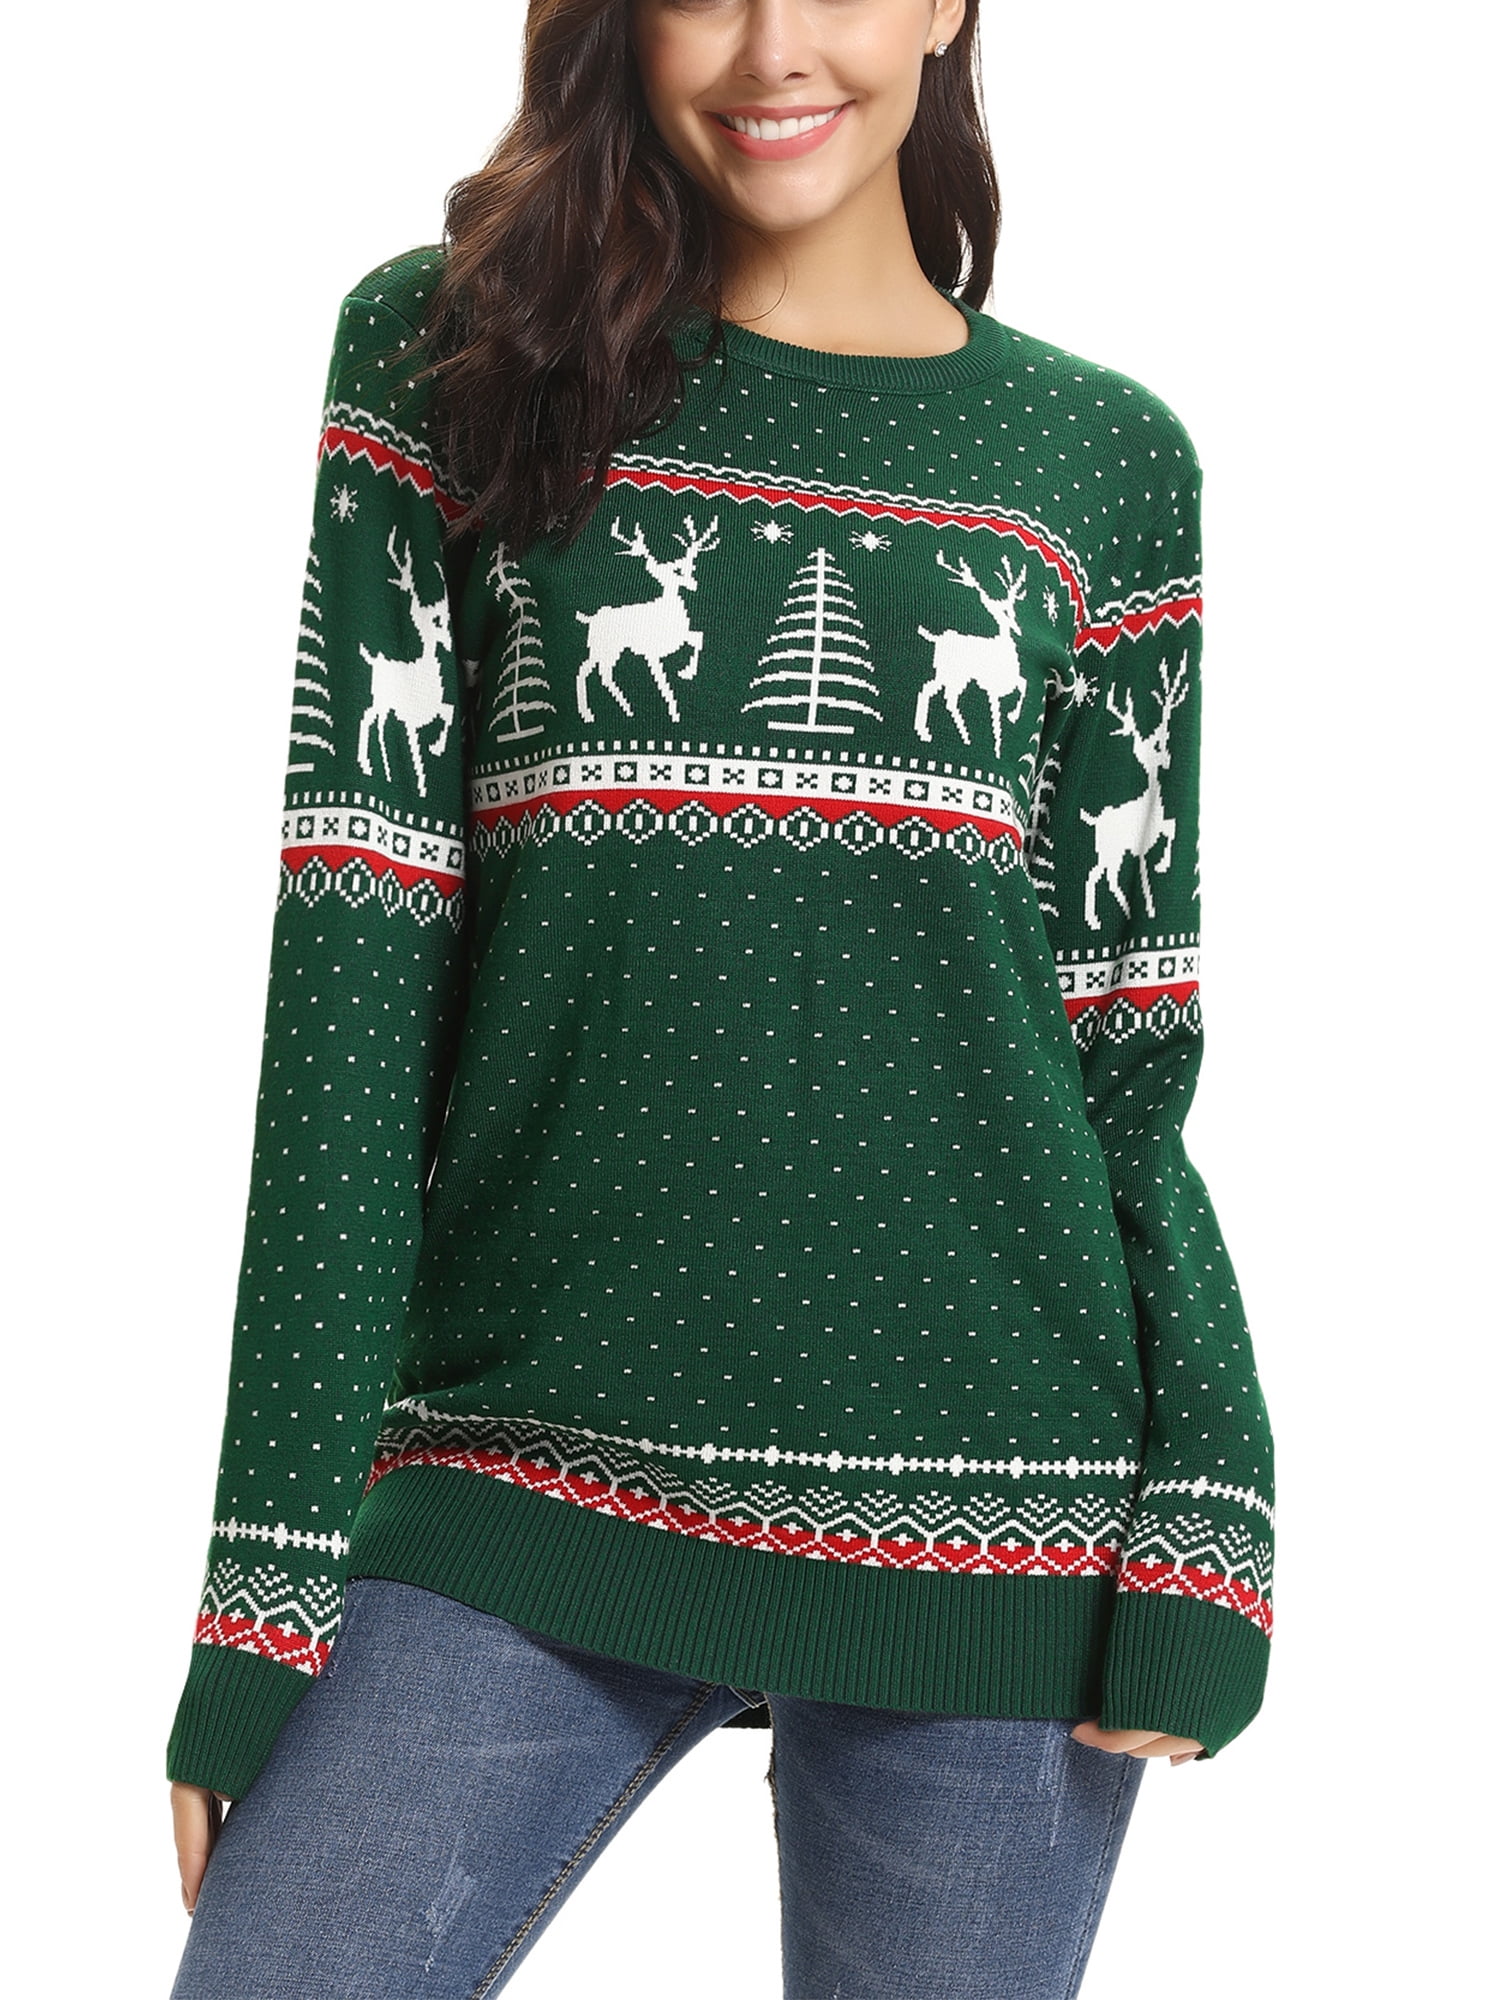 Chama Christmas Jumper for Women Crew Neck Reindeers Snowflake Sweaters ...